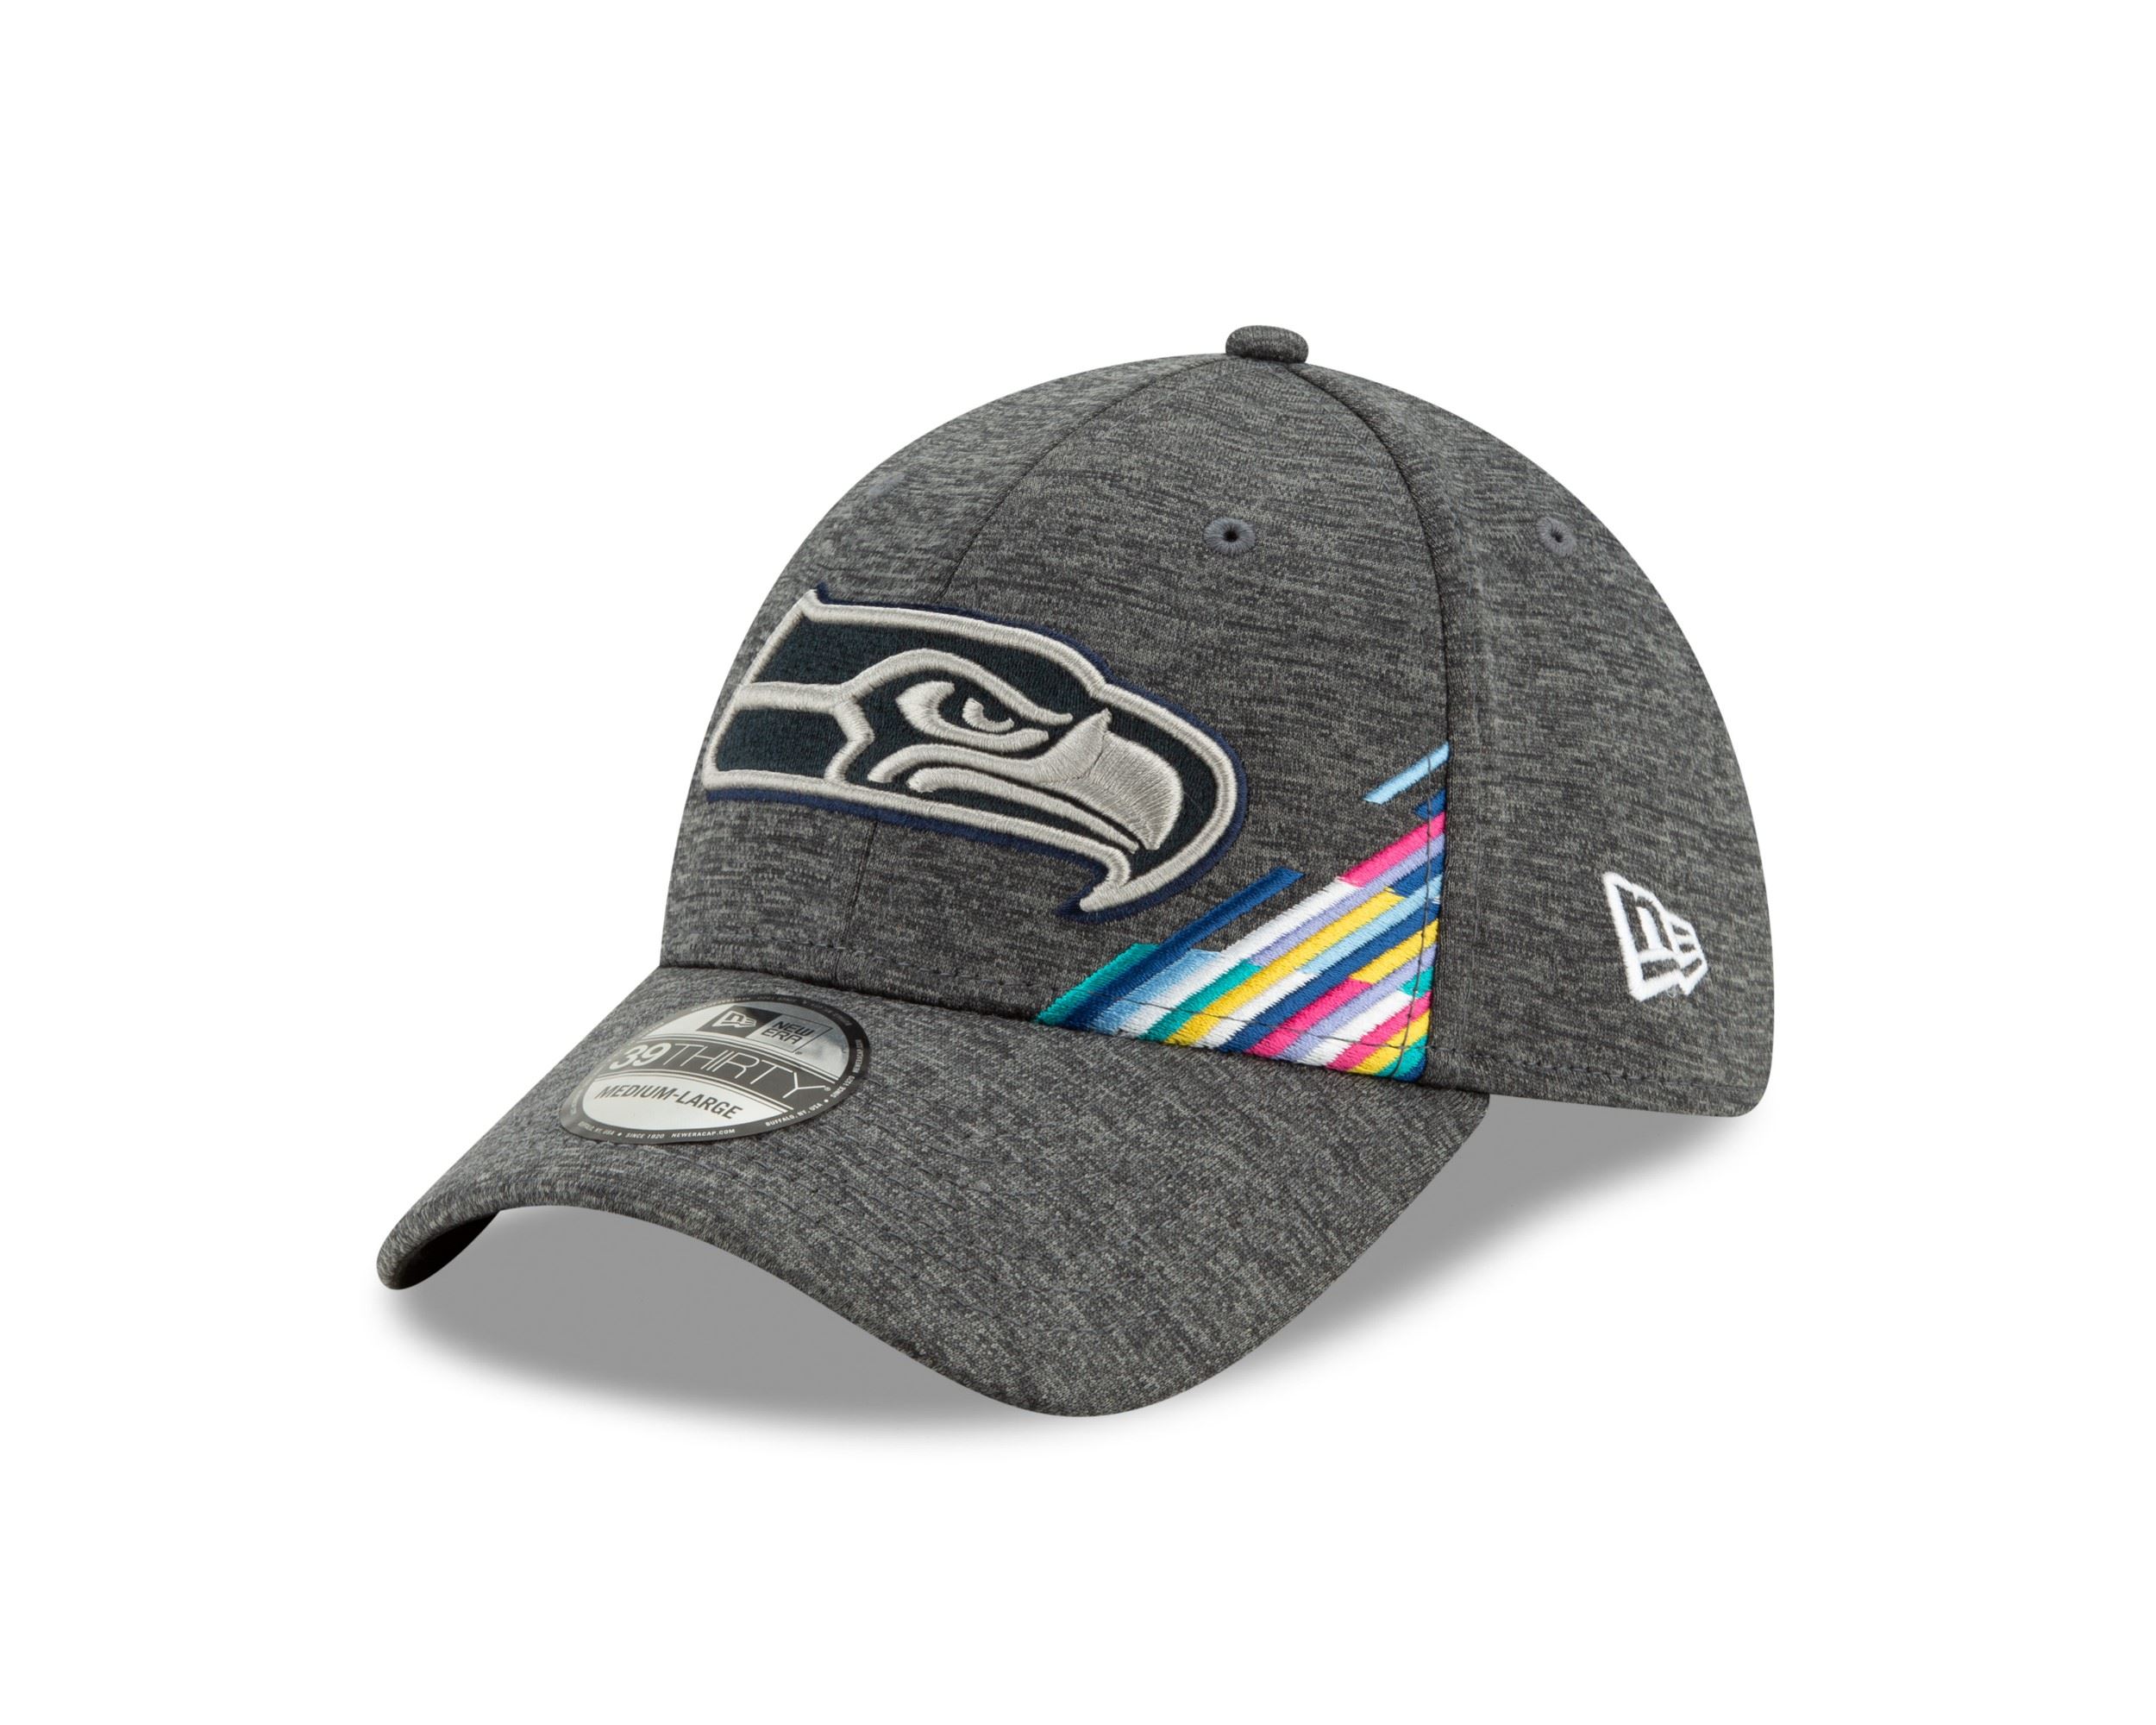 Seattle Seahawks NFL 2019 On Field Crucial Catch 39Thirty Cap Graphite New Era